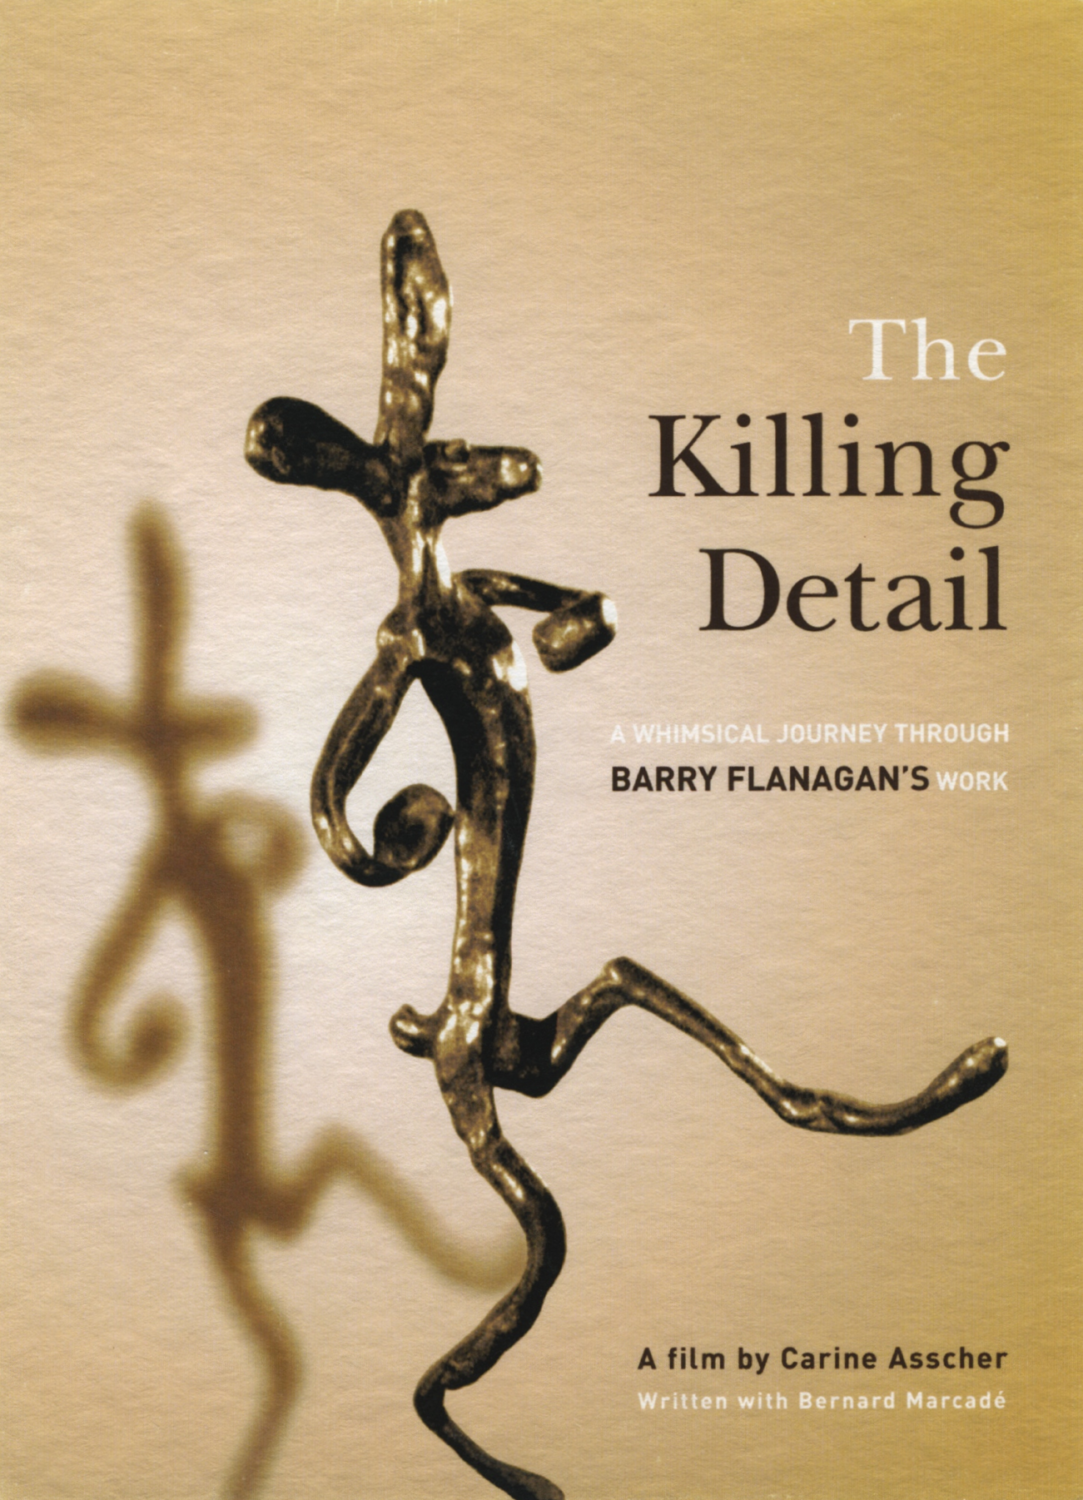 The Killing Detail. A Whimsical Journey Through Barry Flanagan’s Work (1986)